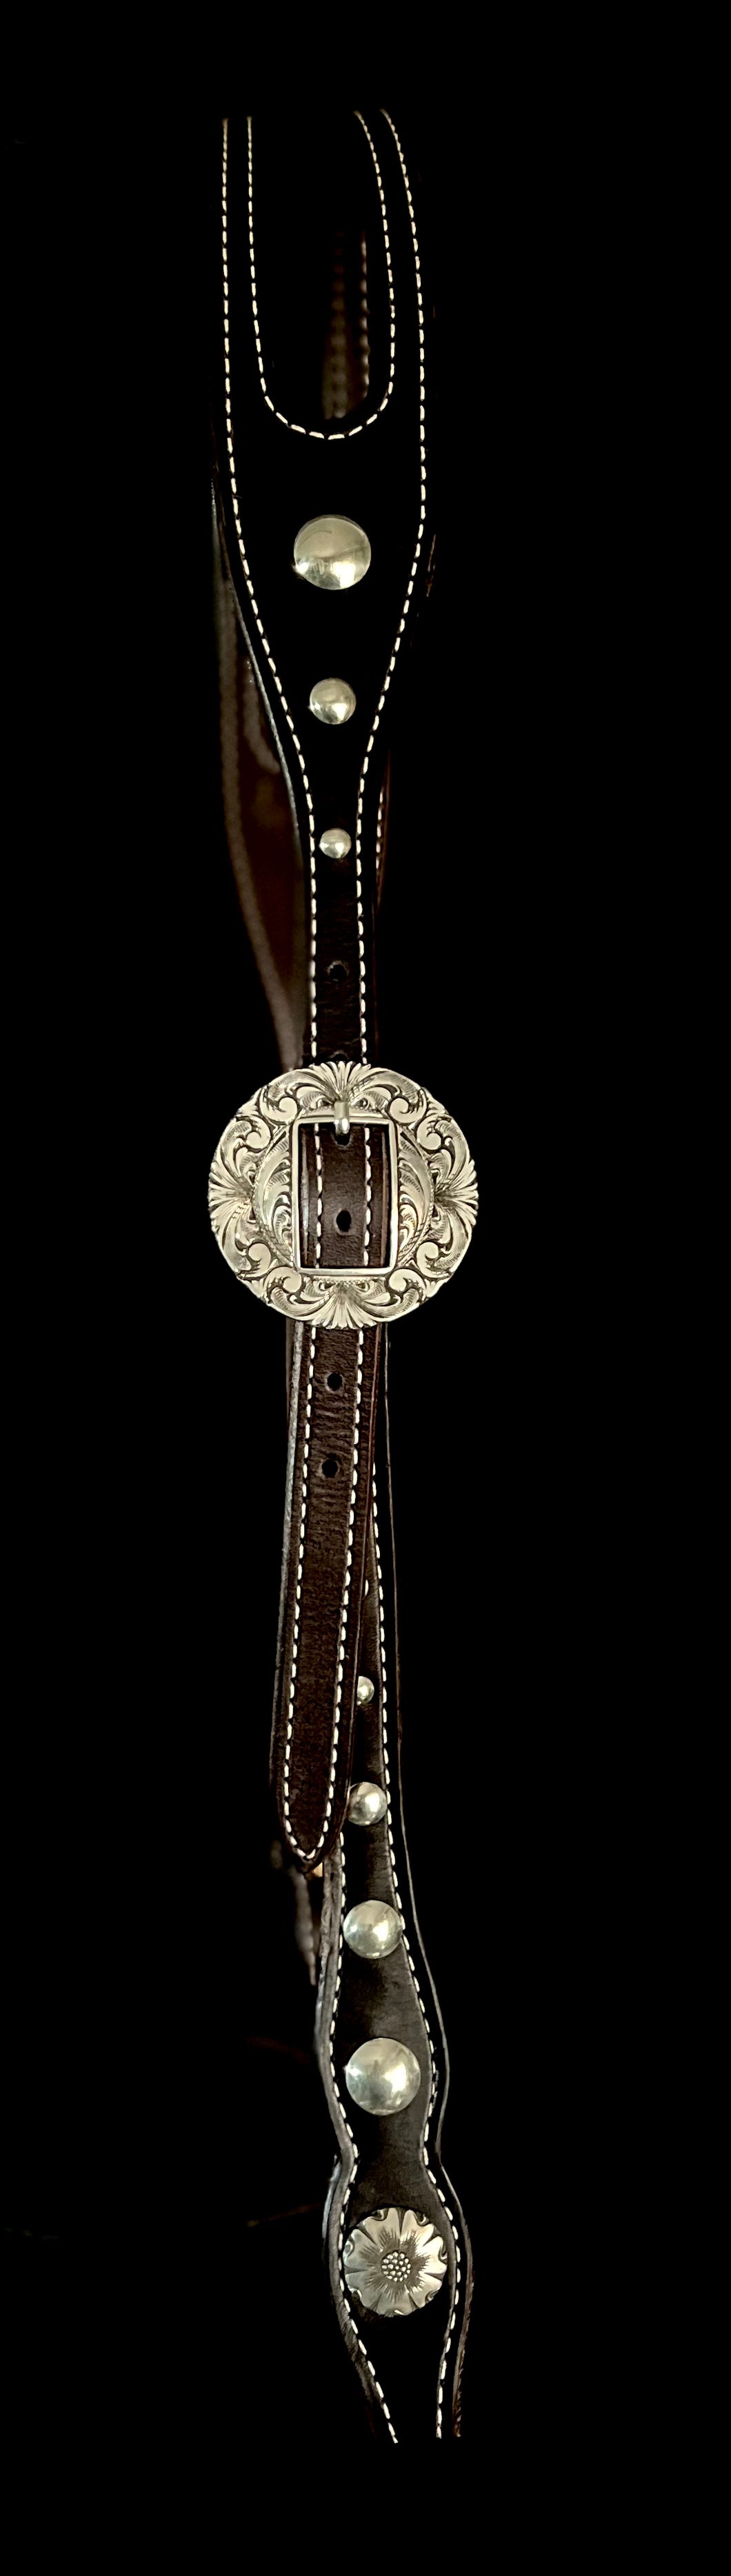 Split Ear Headstall with Concho Buckle and spots